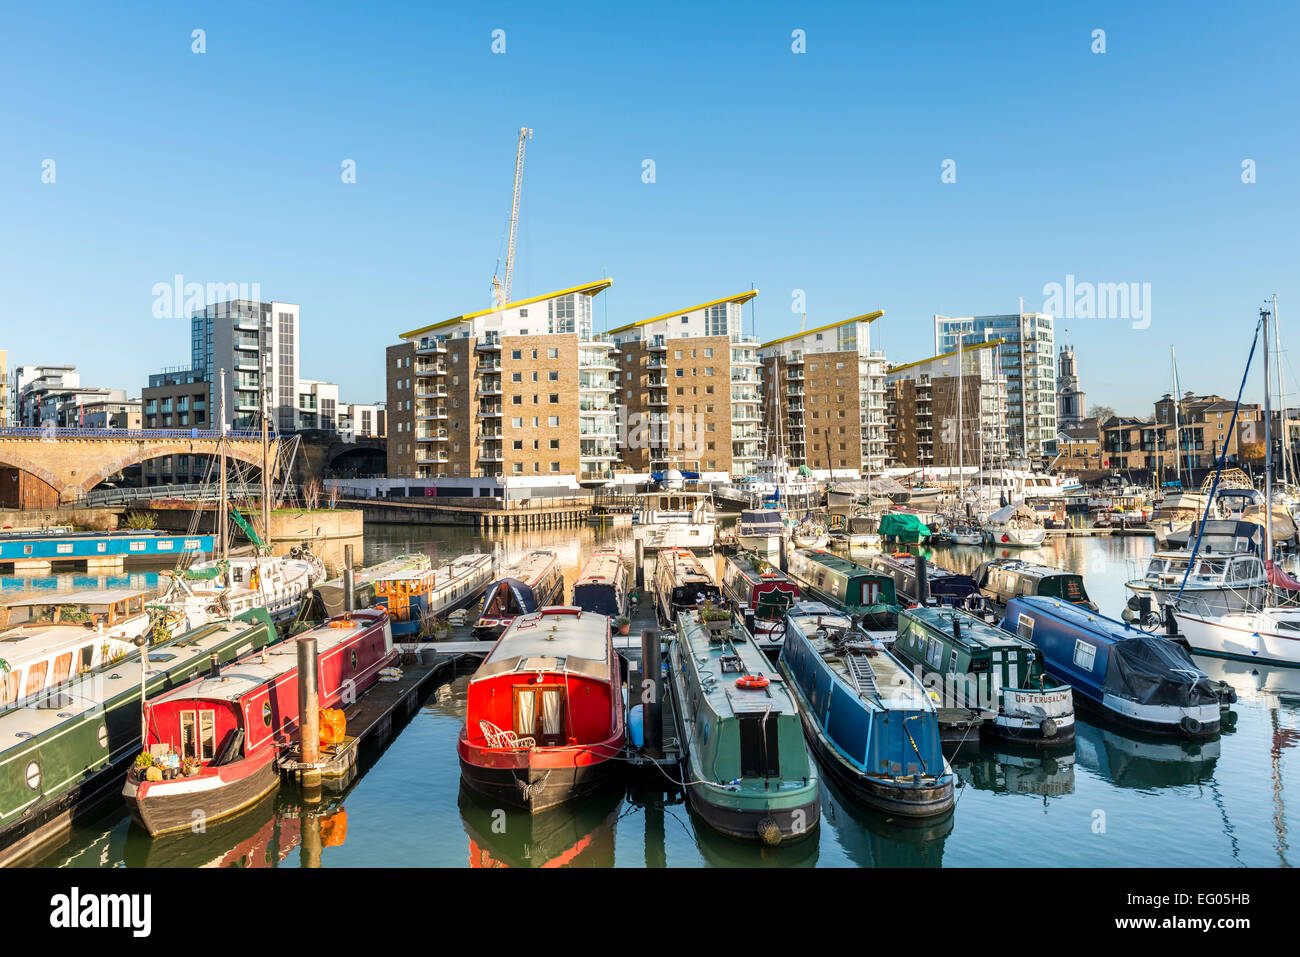 The Limehouse Basin in East London is a Docklands marina and residential housing development in the Borough of Tower Hamlets Stock Photo